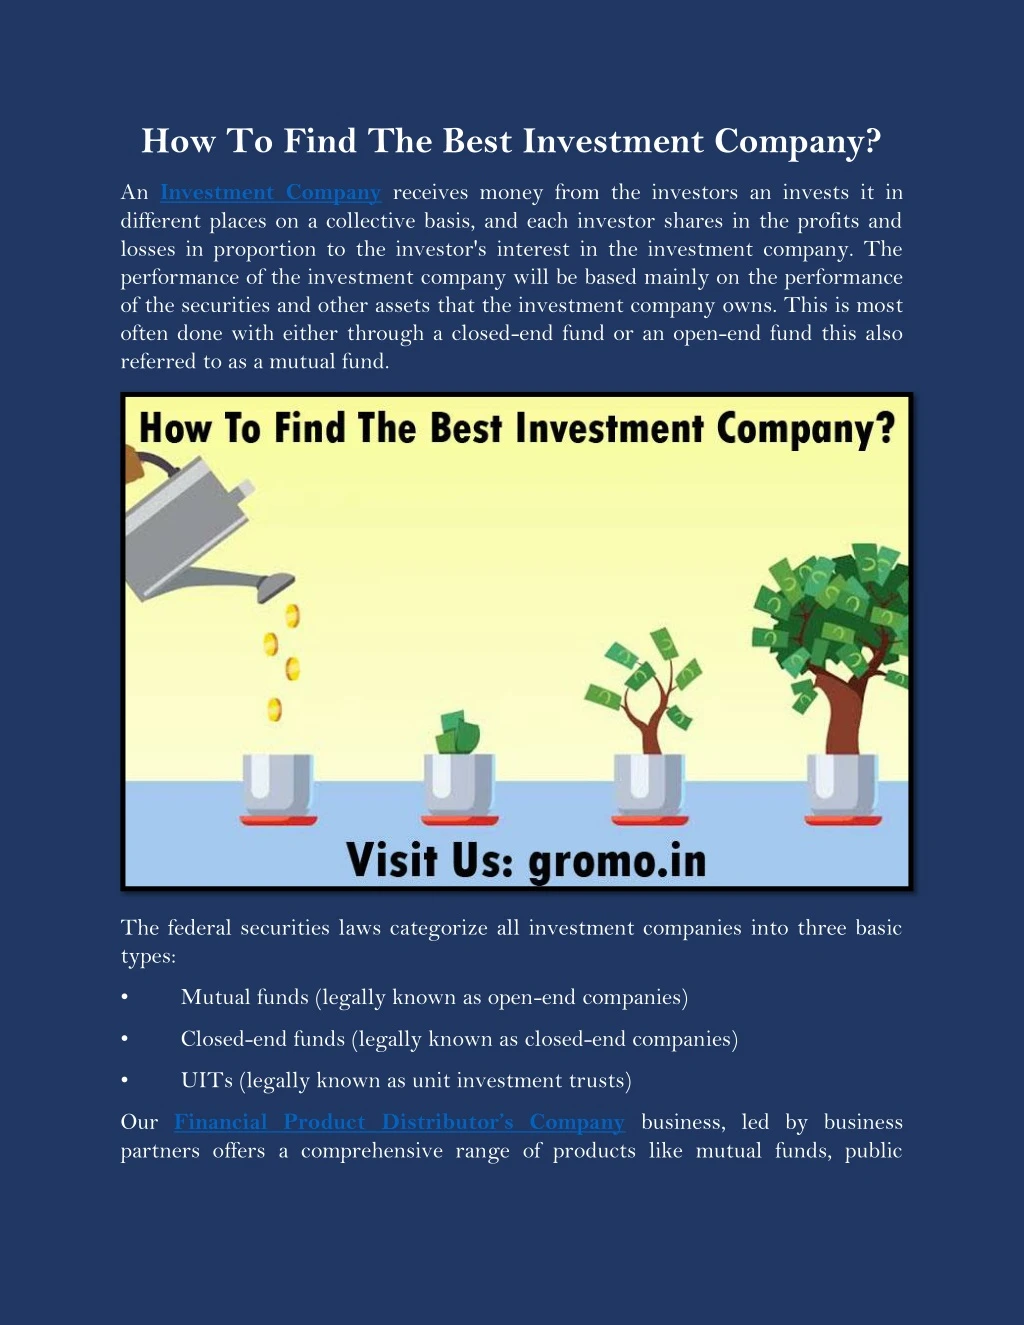 how to find the best investment company